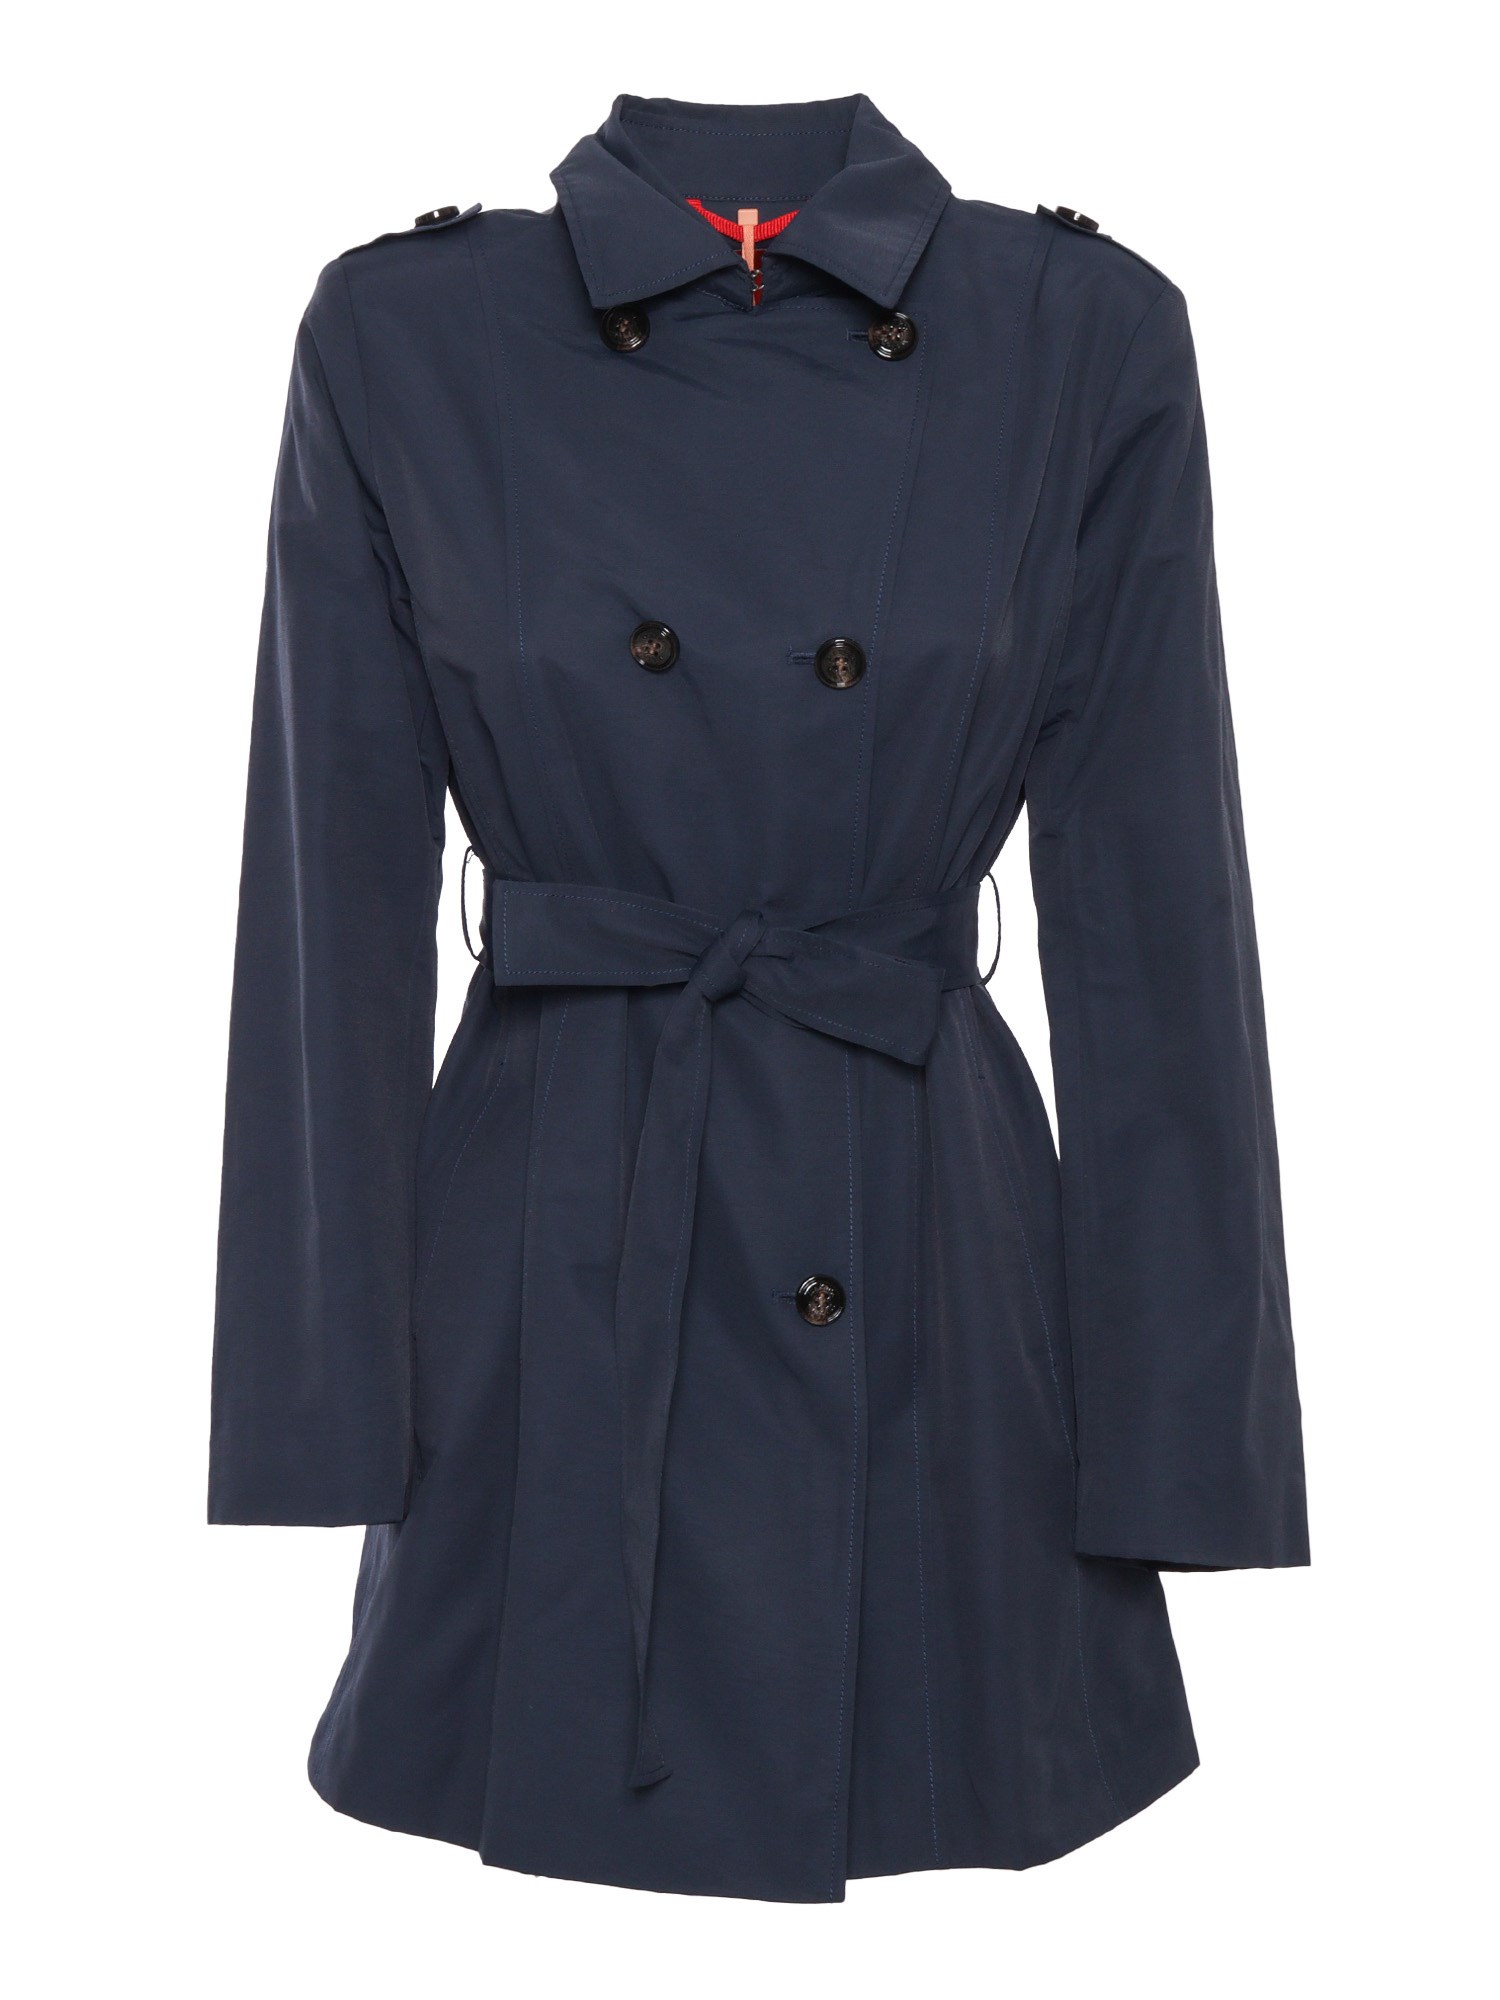 Max & Co Blue Double-breasted Trench Coat